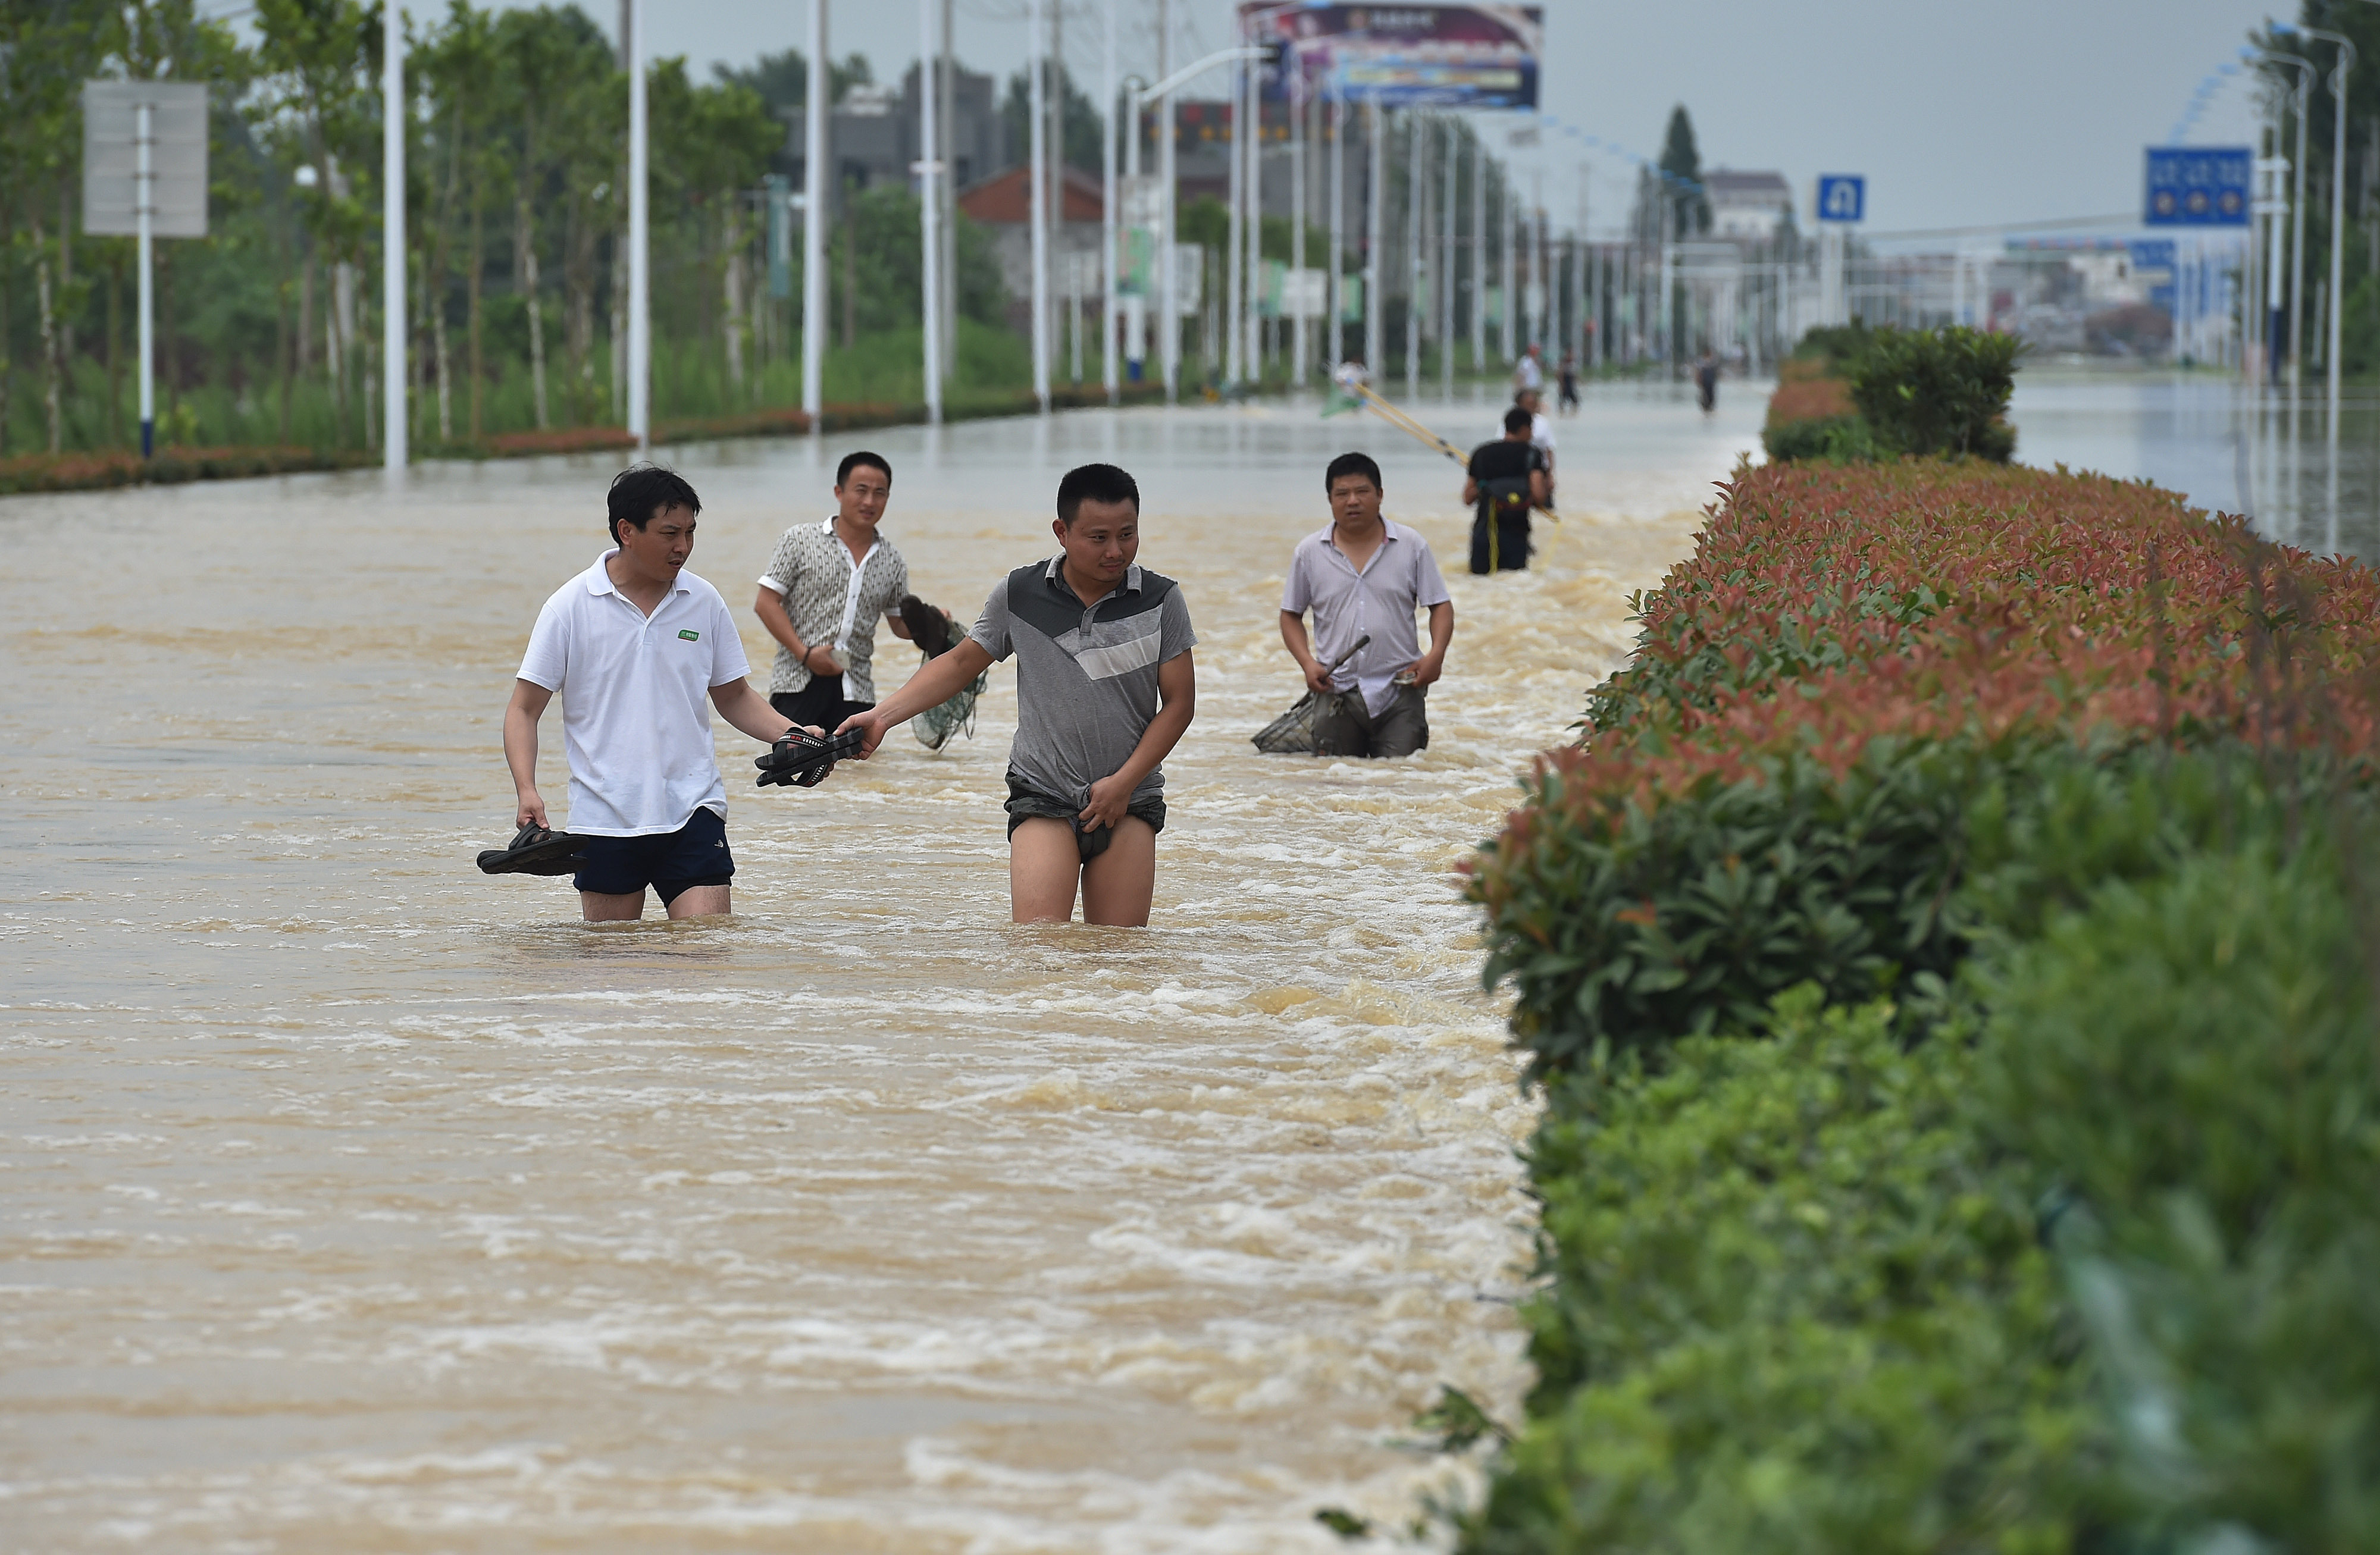 Residents walk in the flood caused by a rainstorm in Shucheng county, China's Anhui province, on July 3, 2016 (VCG/Getty Images)